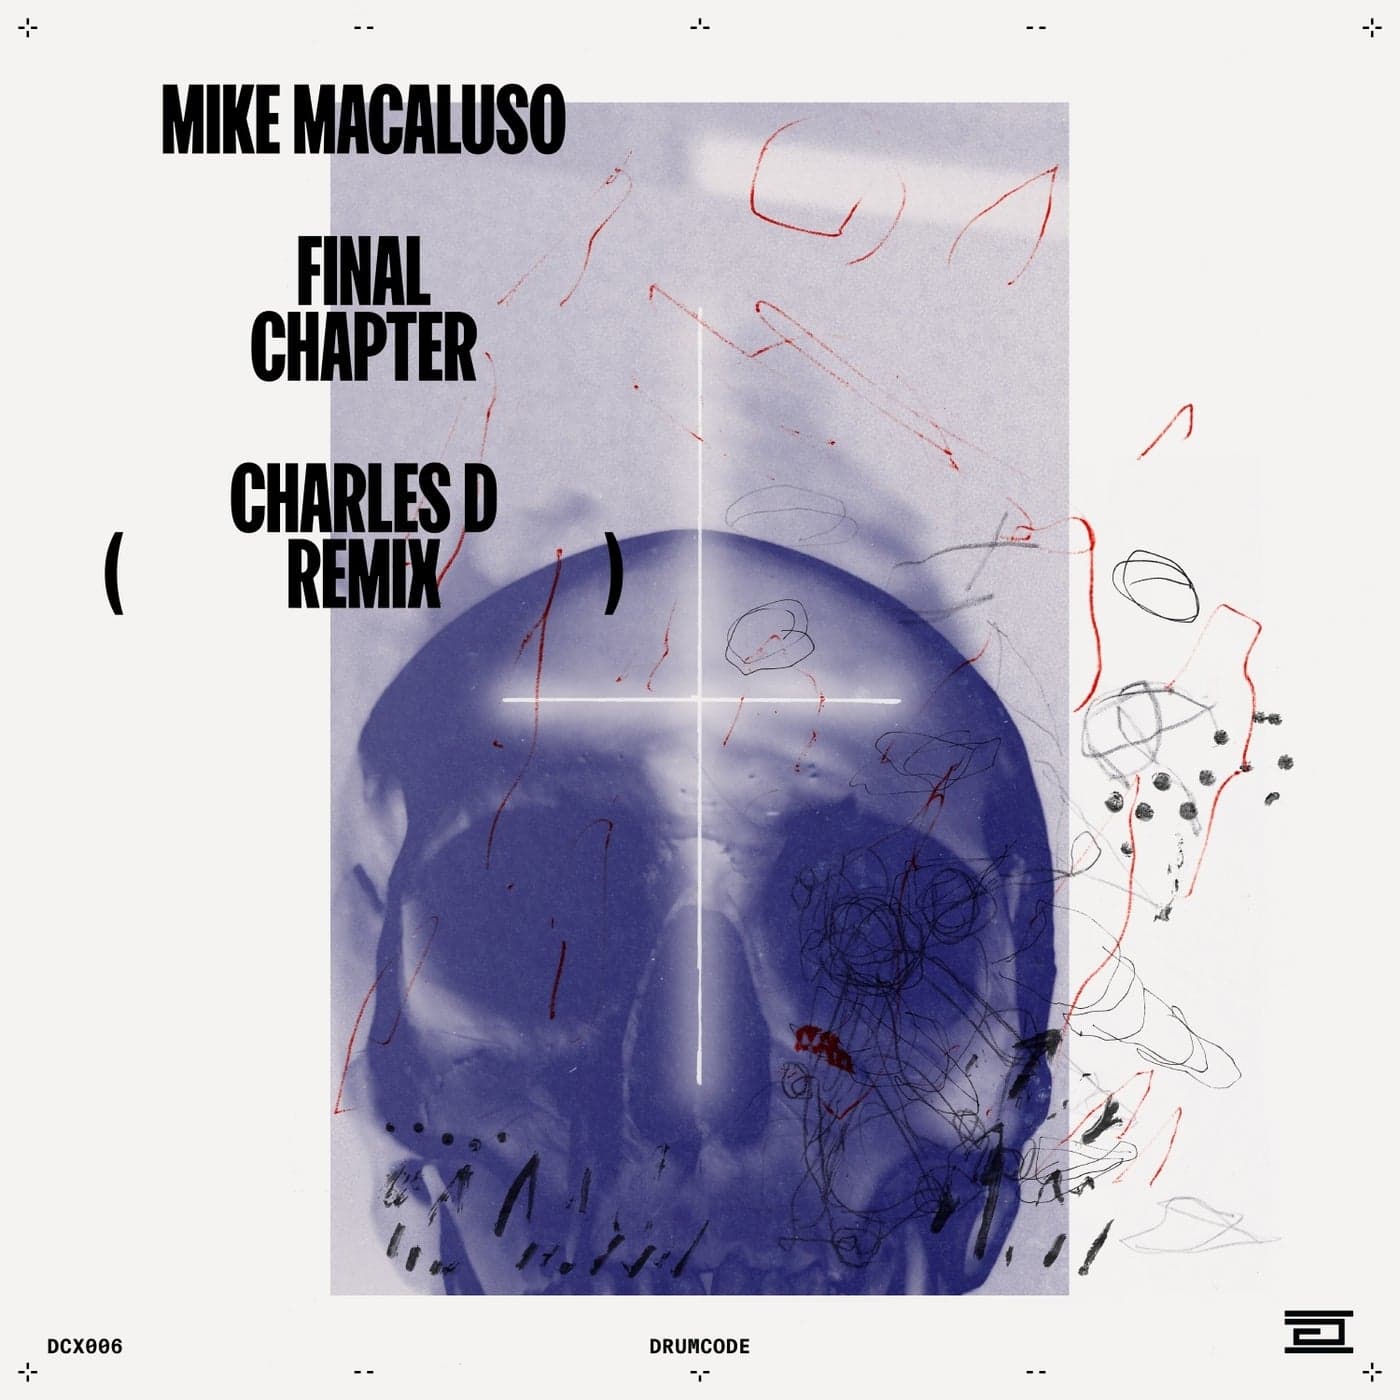 image cover: Mike Macaluso - Final Chapter (Charles D Remix) / DCX006